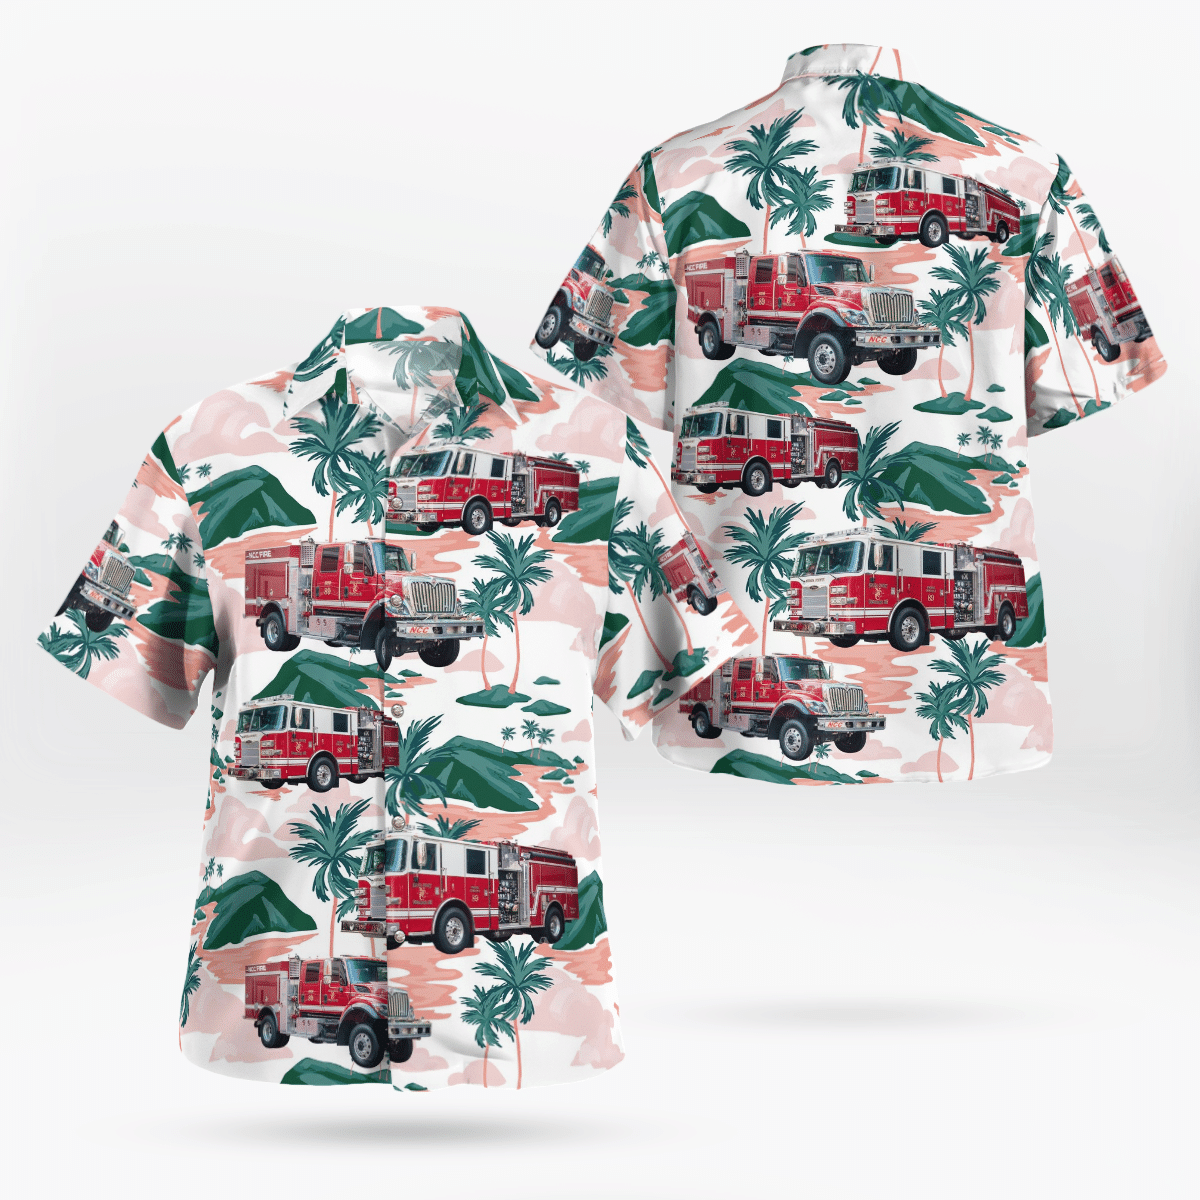 If you want to be noticed, wear These Trendy Hawaiian Shirt 97